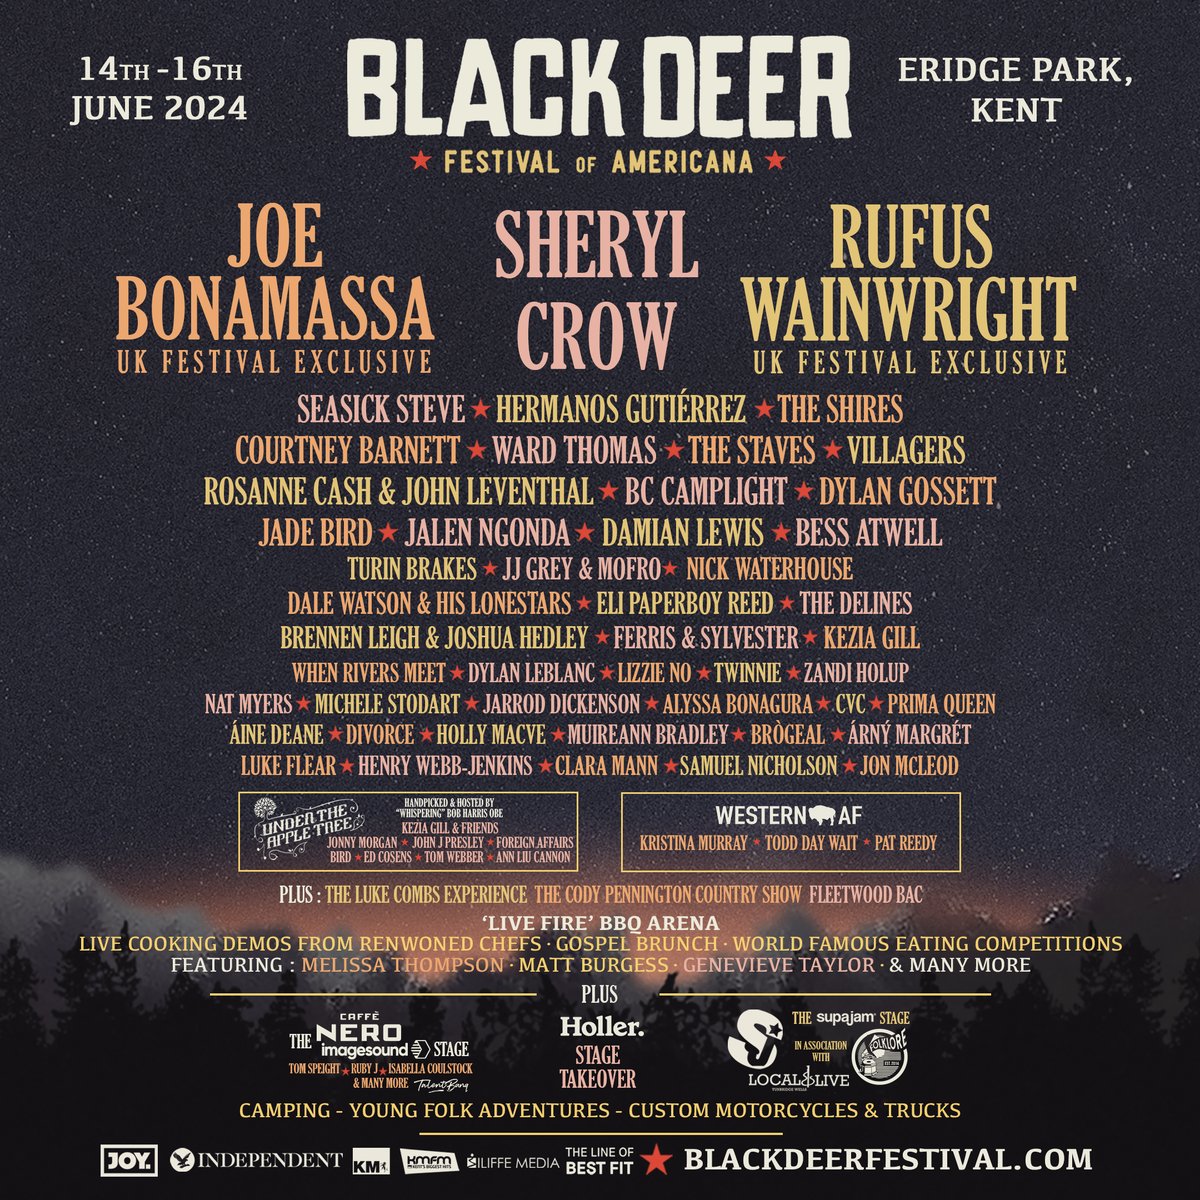 Our Sunday headliner has arrived! What a pleasure to be bringing @rufuswainwright to #BlackDeer2024 as a UK Festival Exclusive! Alongside more fantastic new additions: @JadeBirdMusic / @rosannecash & John leventhal / @BrennenLeigh & @JoshuaHedley / @WhenRiversMeet / Jon McLeod